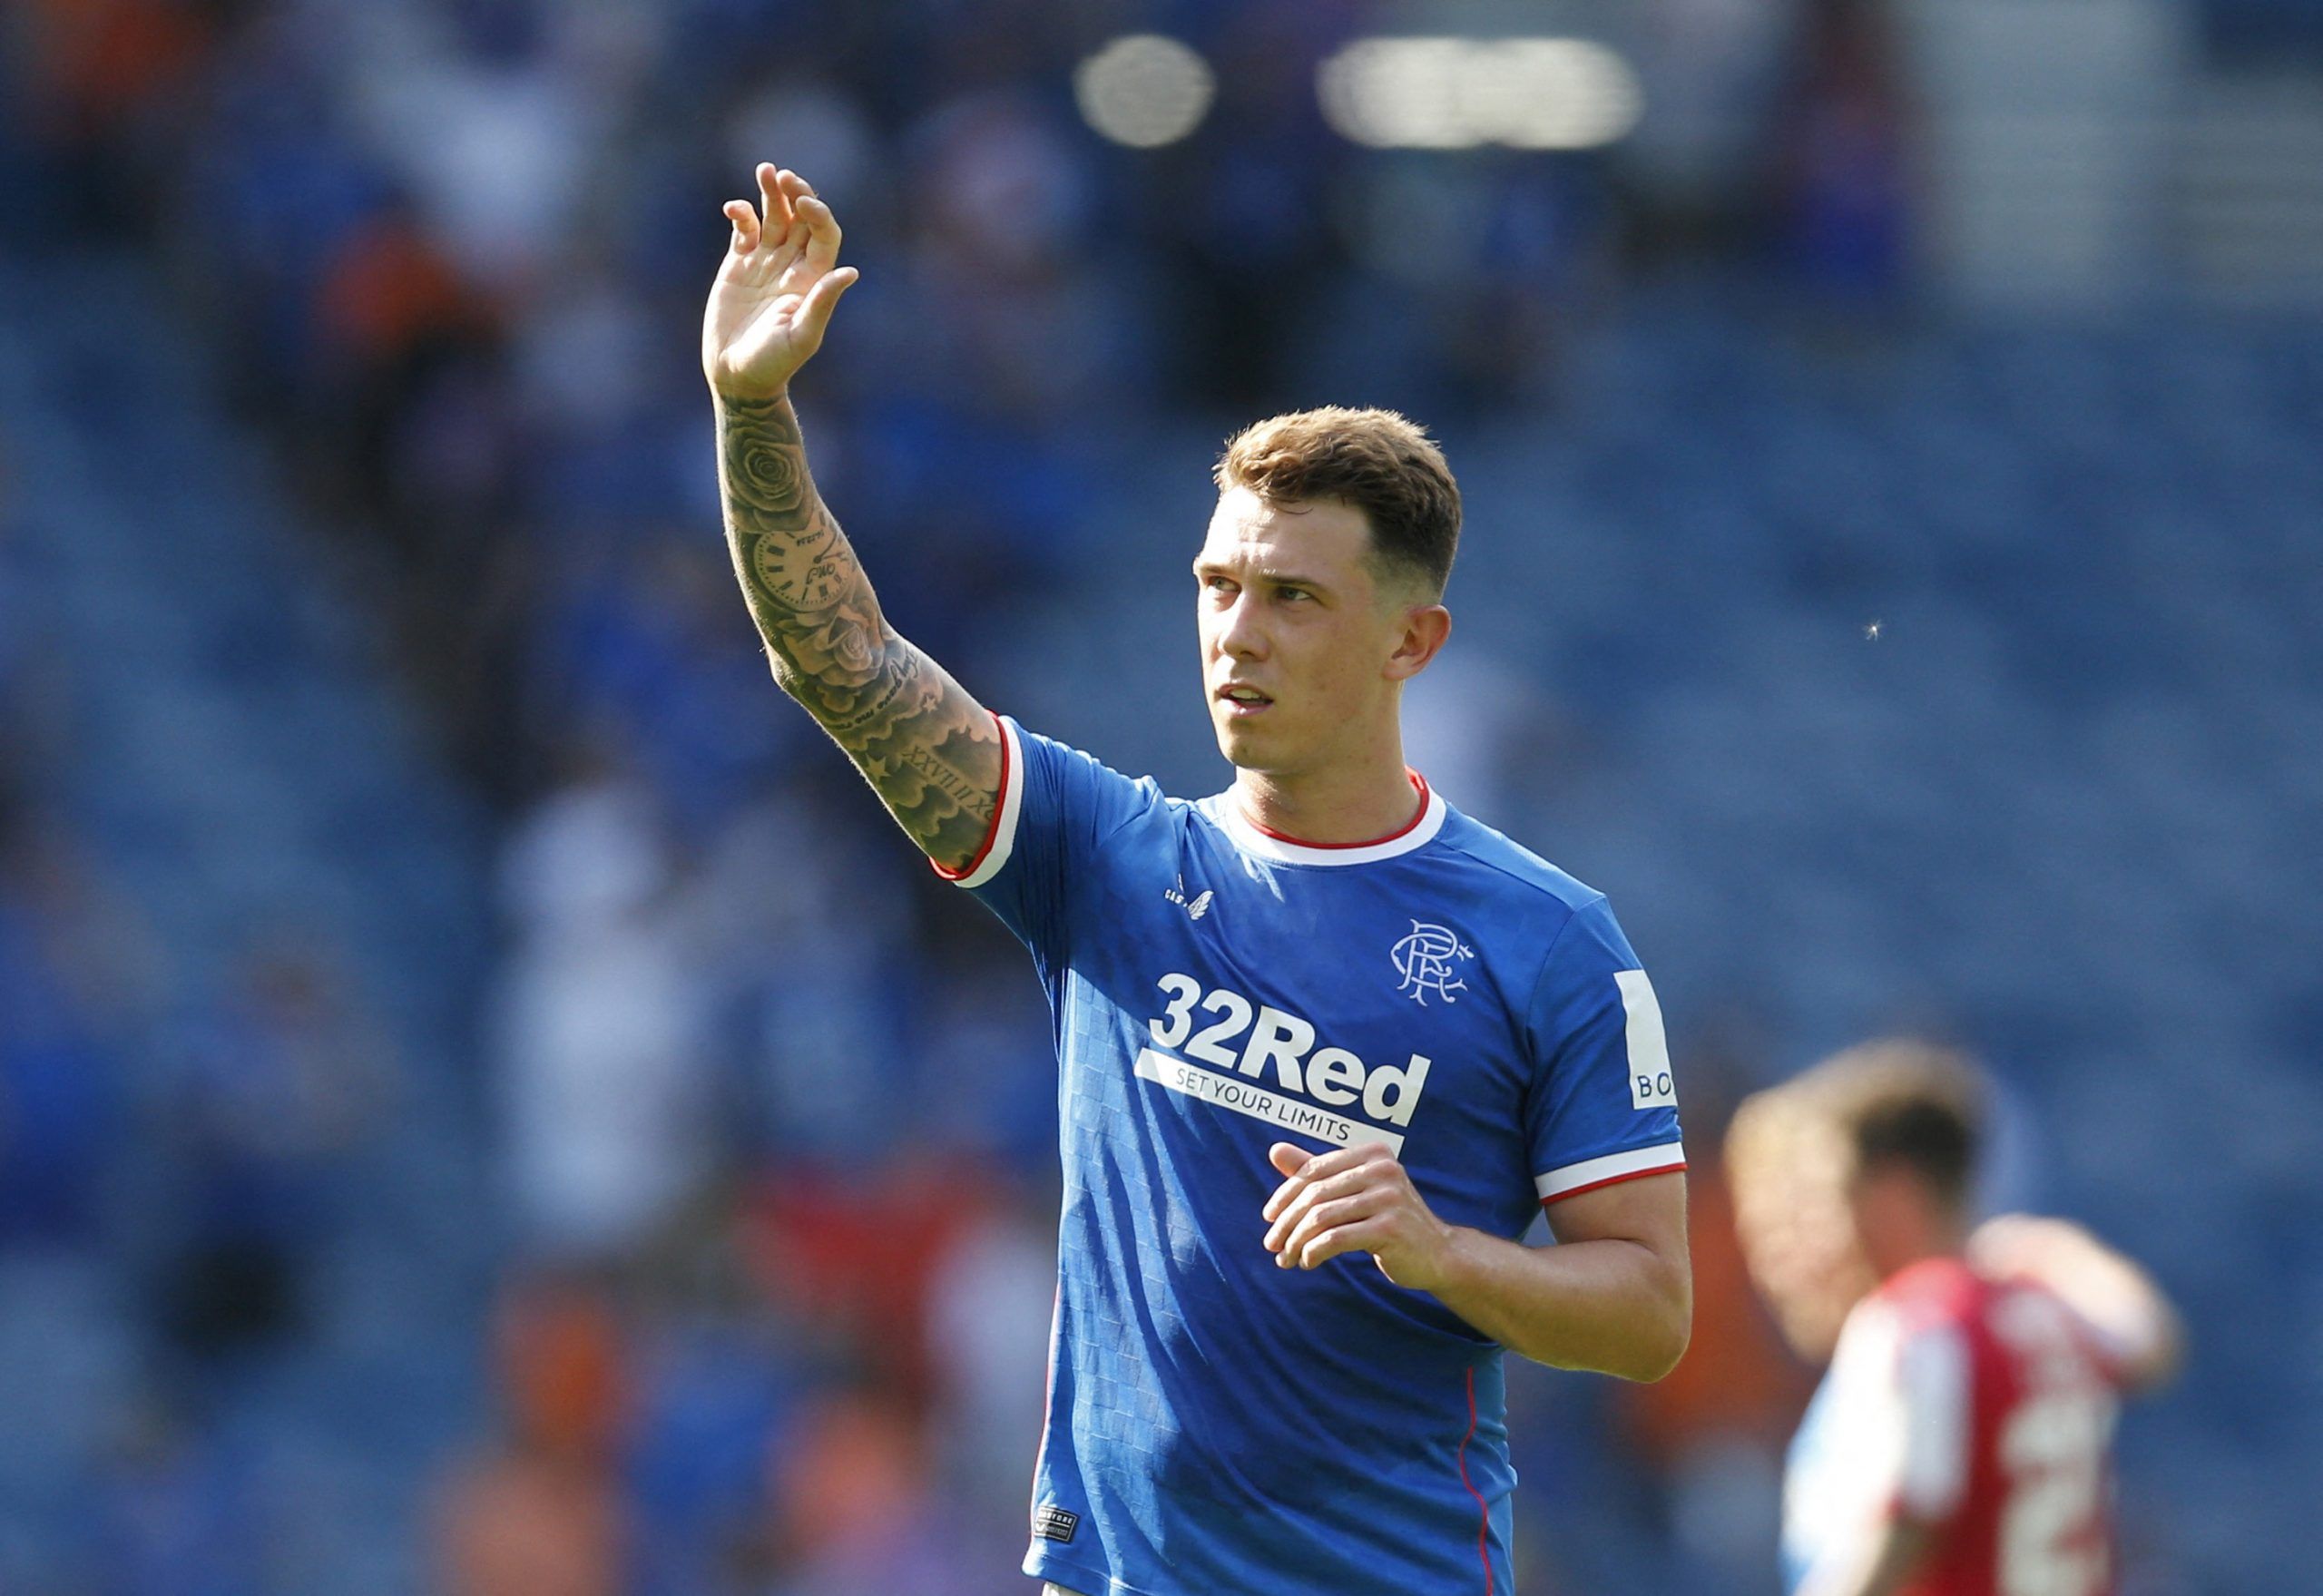 Rangers: Ryan Jack and Connor Goldson out with long-term injuries -Rangers News